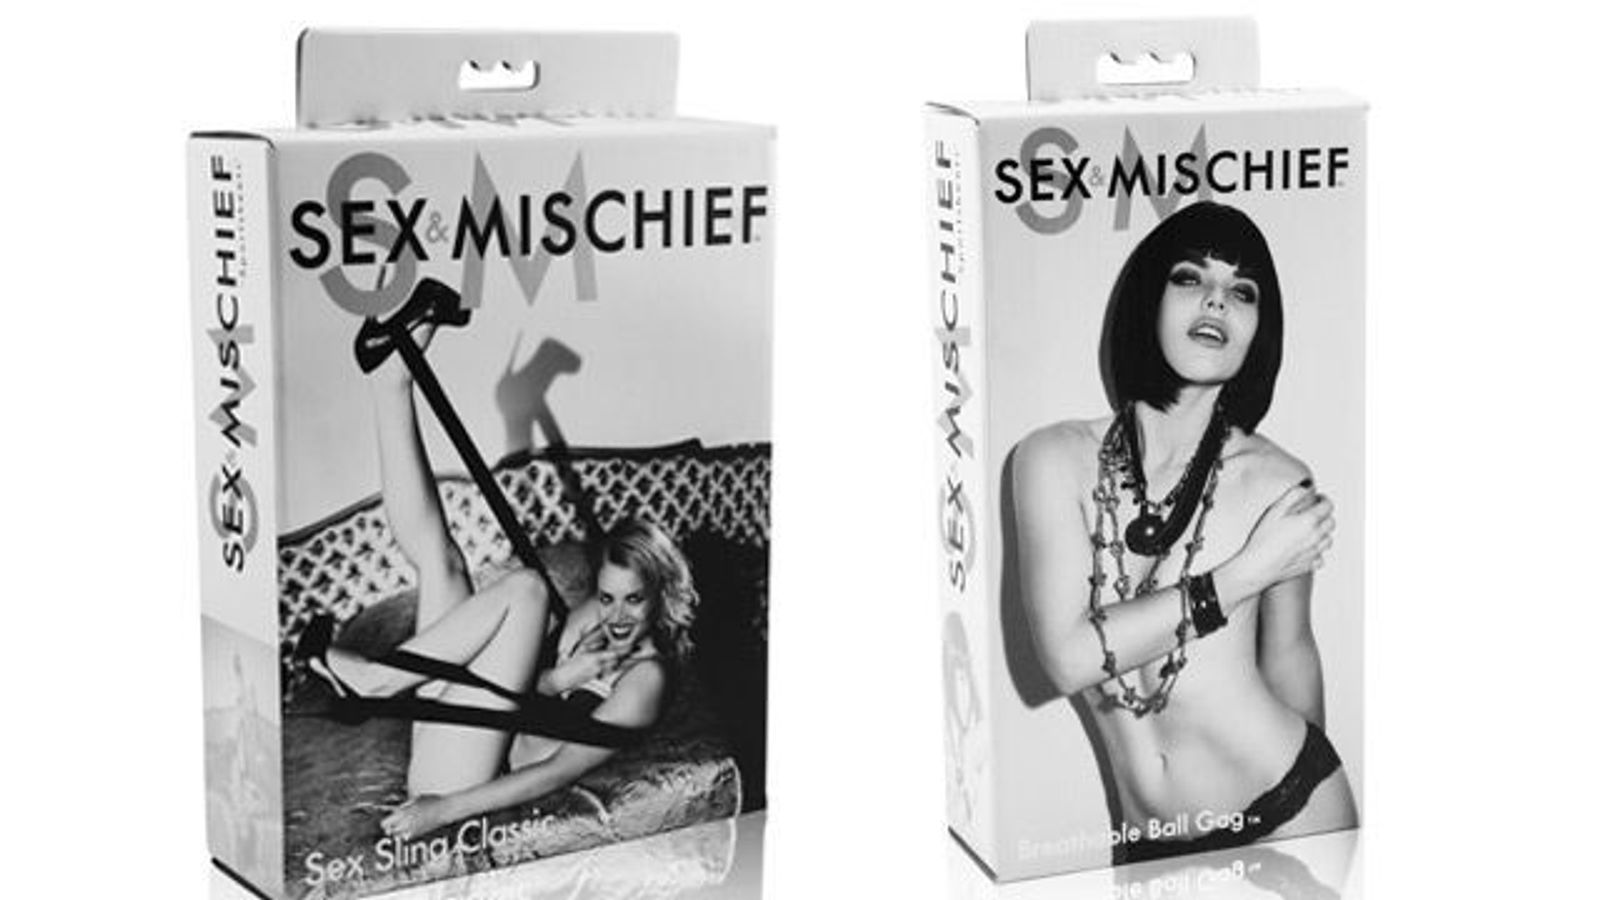 Sportsheets’ Sex & Mischief, Entrenue Get Boost from ‘Fifty Shades’